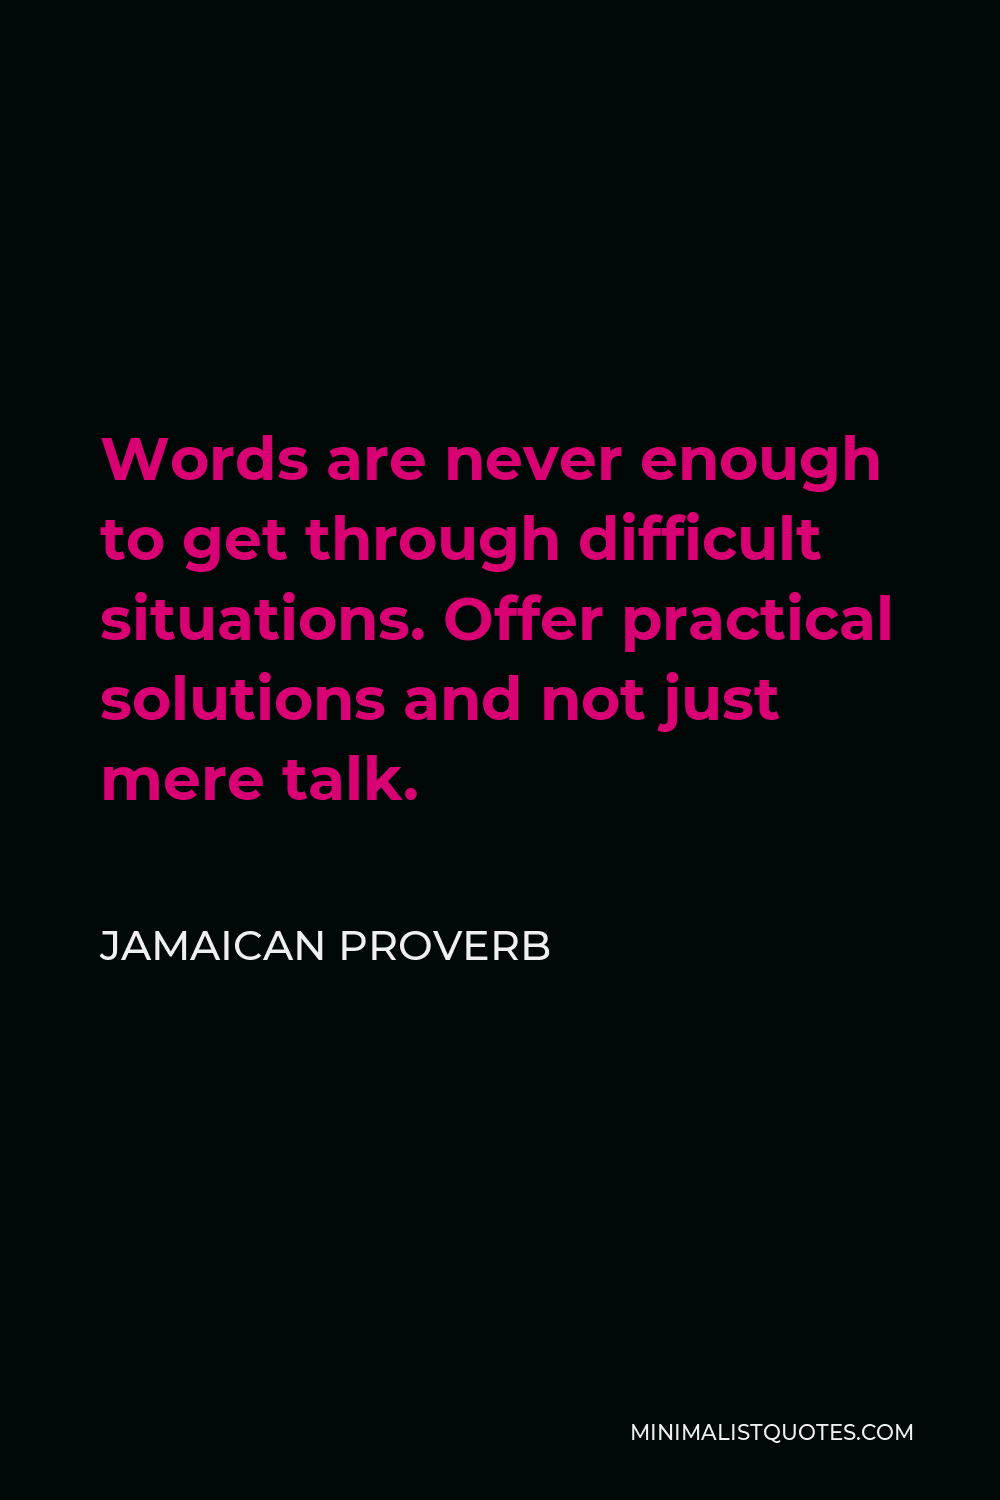 Jamaican Proverb Quote - Words are never enough to get through difficult situations. Offer practical solutions and not just mere talk.